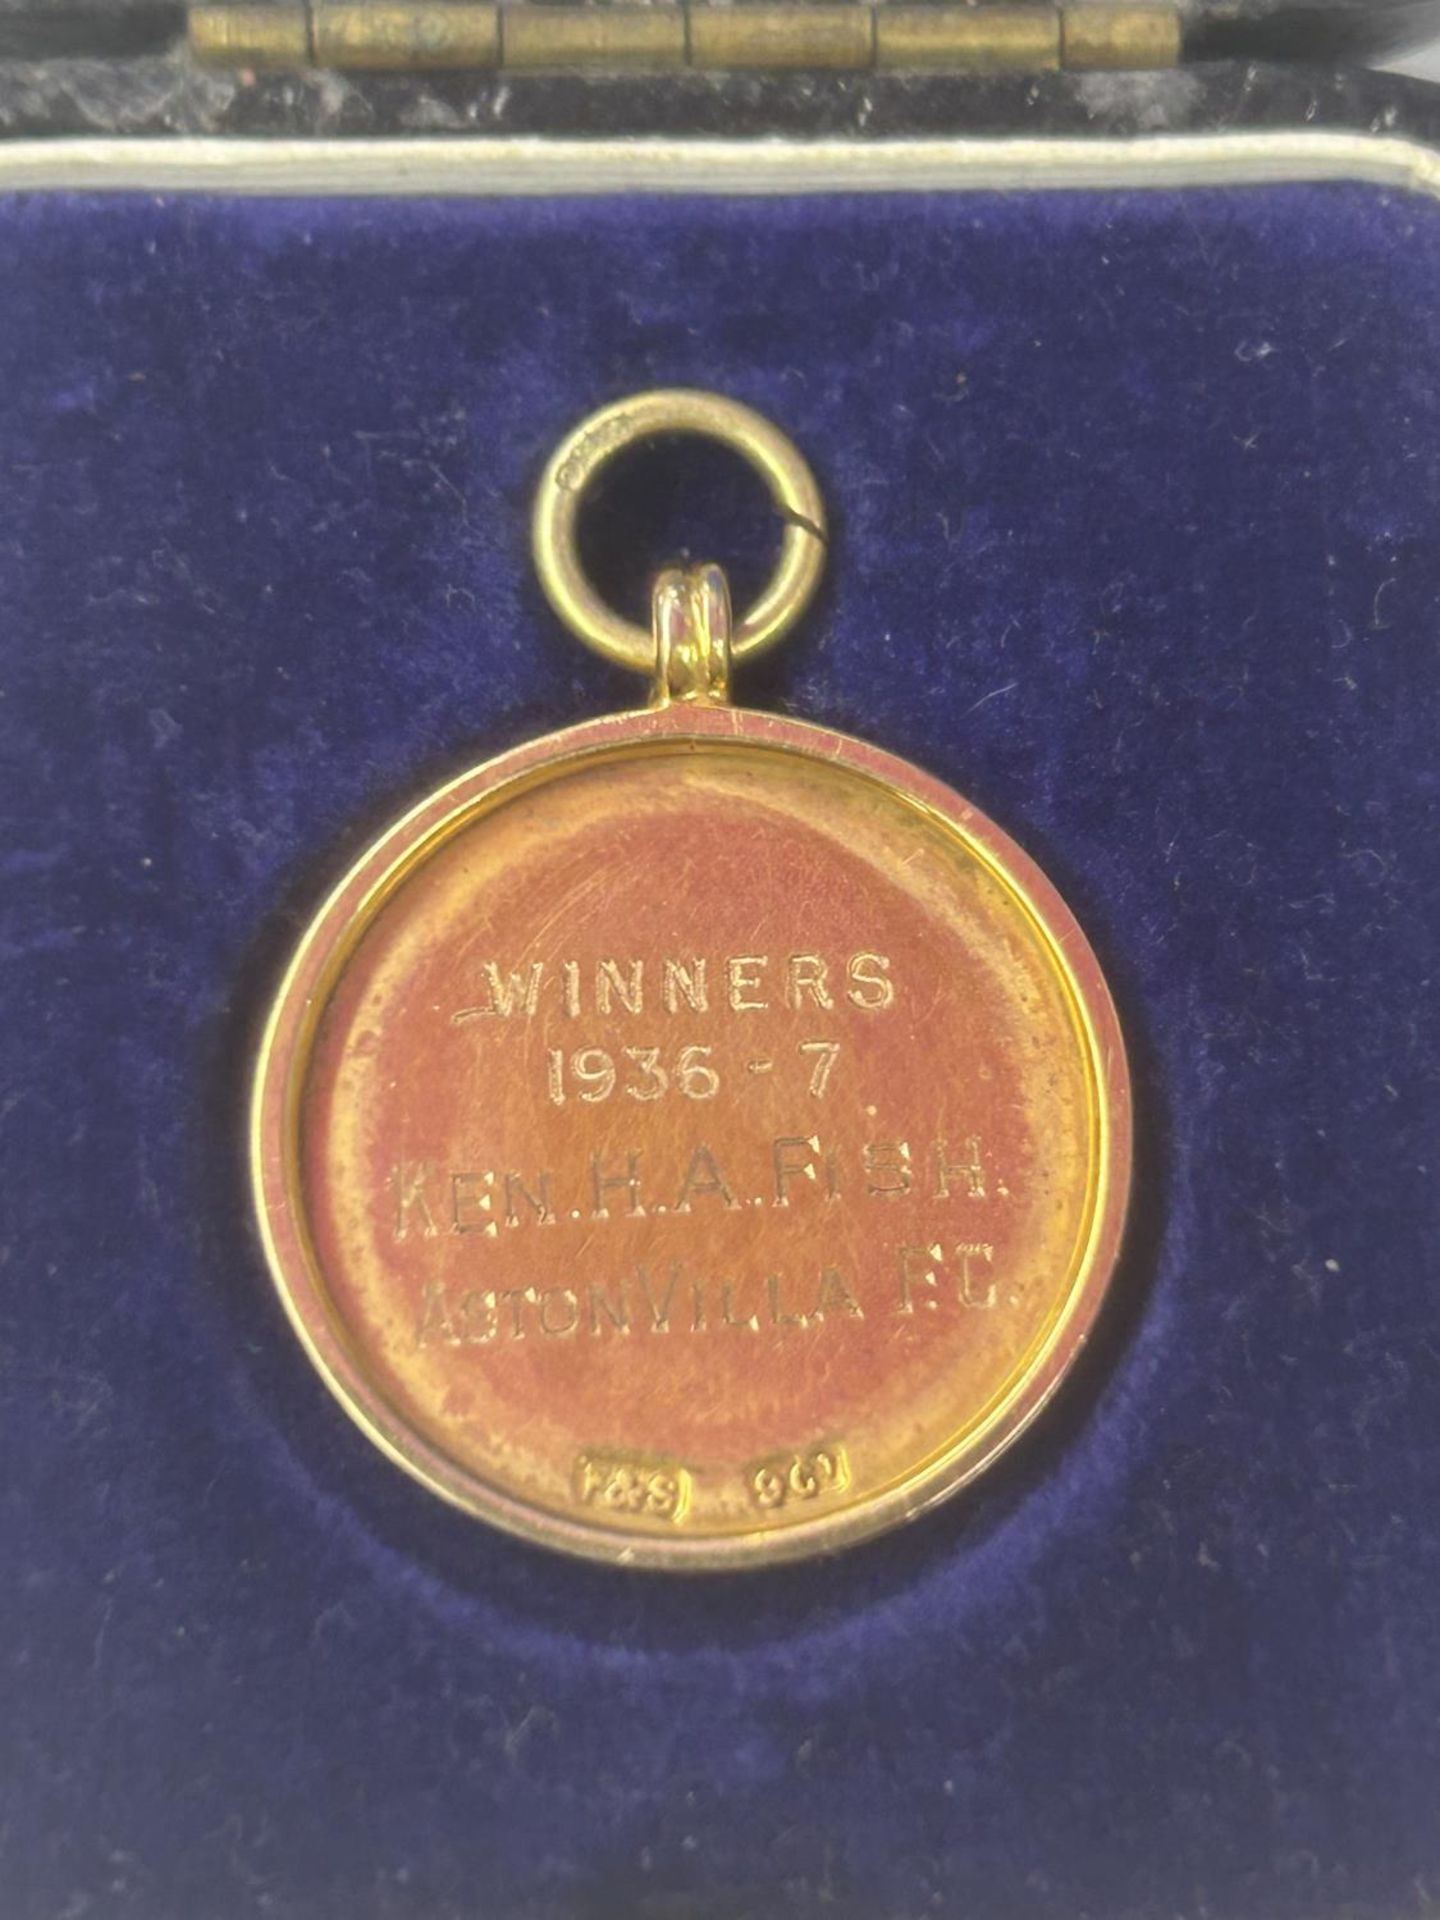 A HALLMARKED 9 CARAT GOLD & ENAMEL LEAMINGTON HOSPITALITY CUP WINNERS MEDAL 1936-1937 SEASON, BY - Image 3 of 5